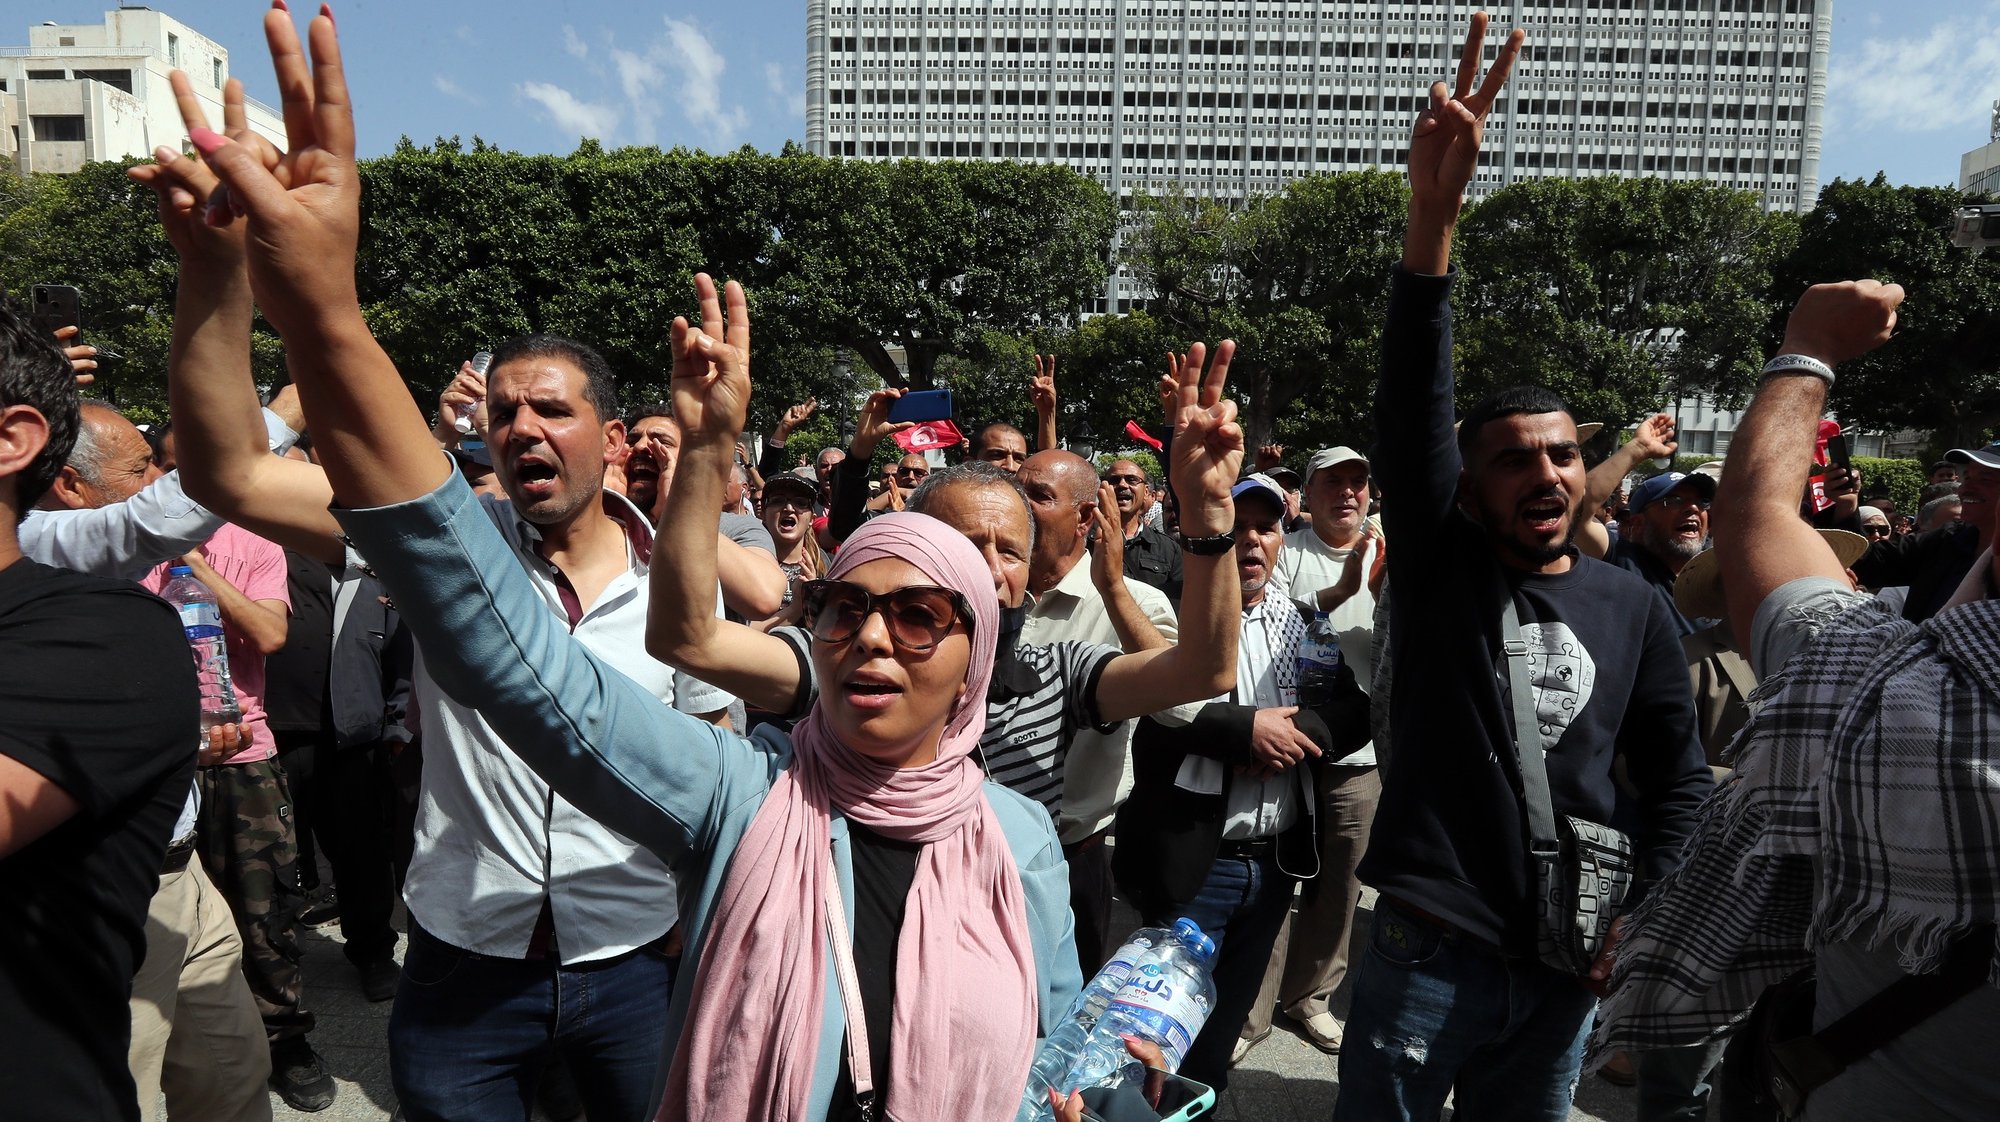 epa09948355 Tunisians shout slogans during a demonstration against Tunisian President Kais Saied in Tunis, Tunisia, 15 May 2022. Tunisians protest against the latest measures taken by President Kais Saied, which they describe as a coup.  EPA/MOHAMED MESSARA